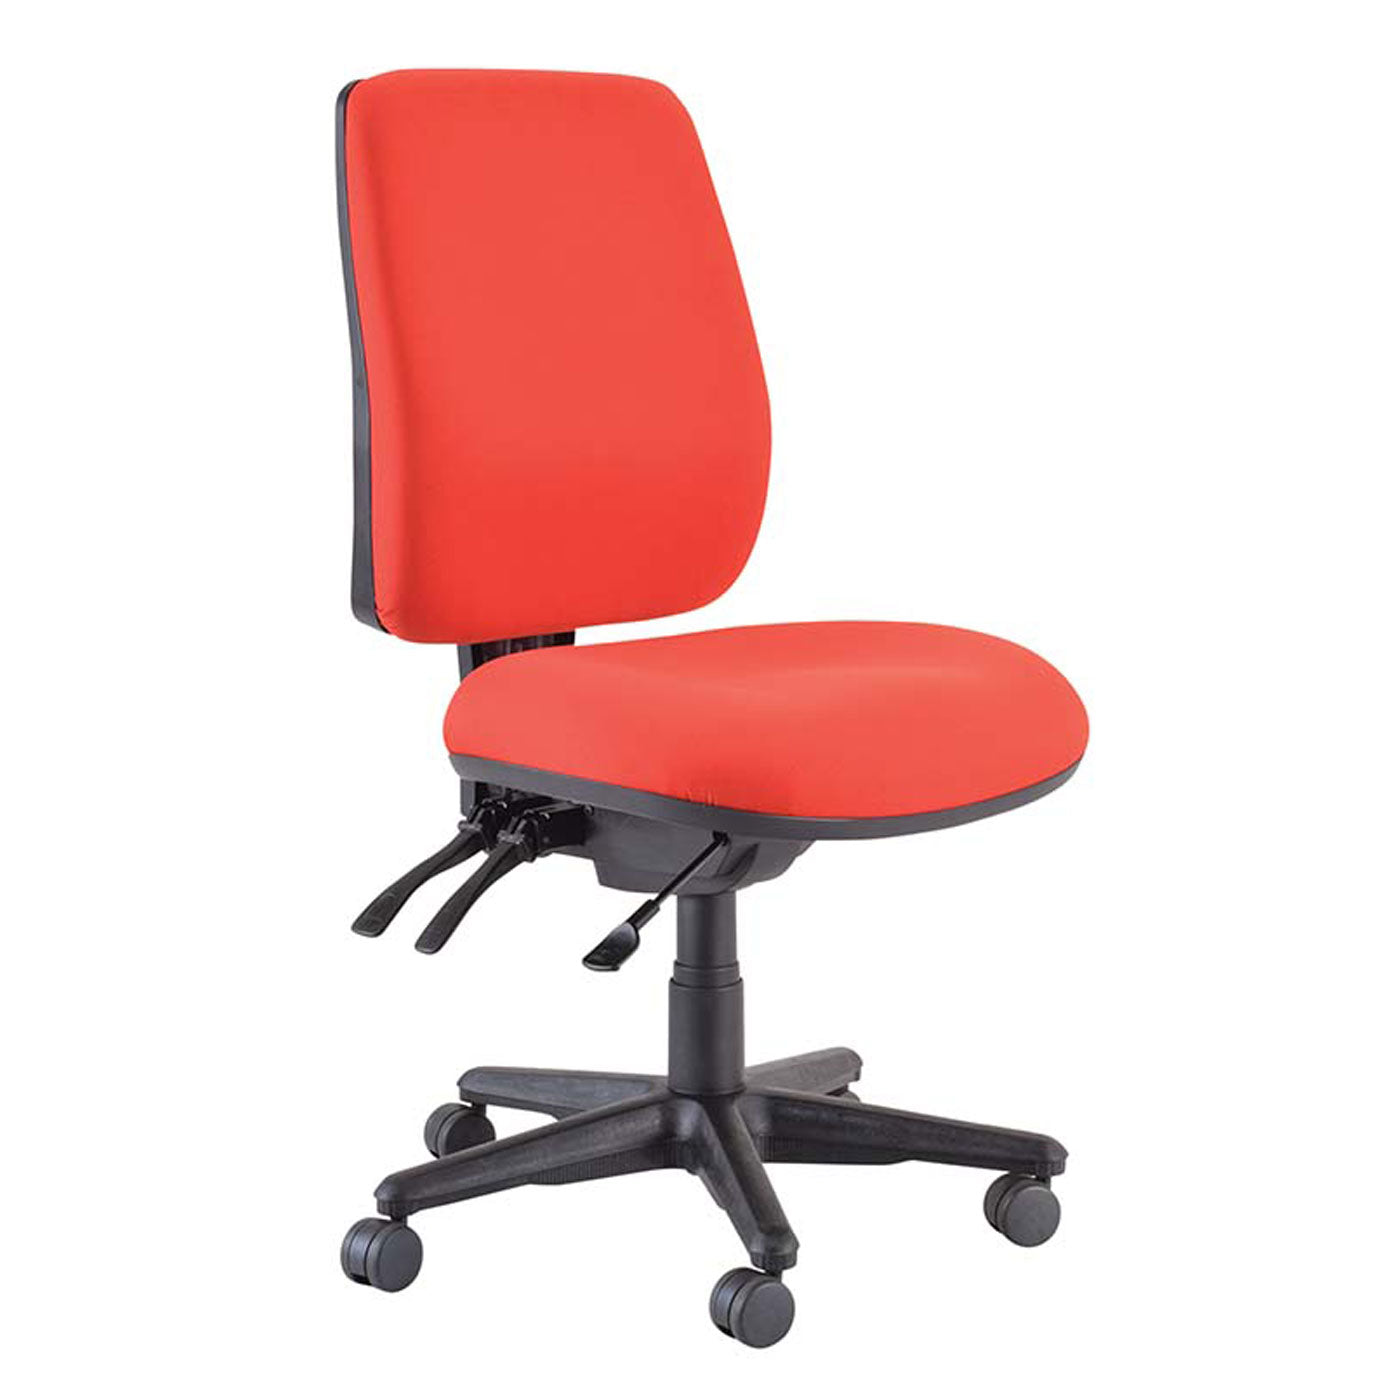 Buro Office Chair 3 Lever High Back Roma Red